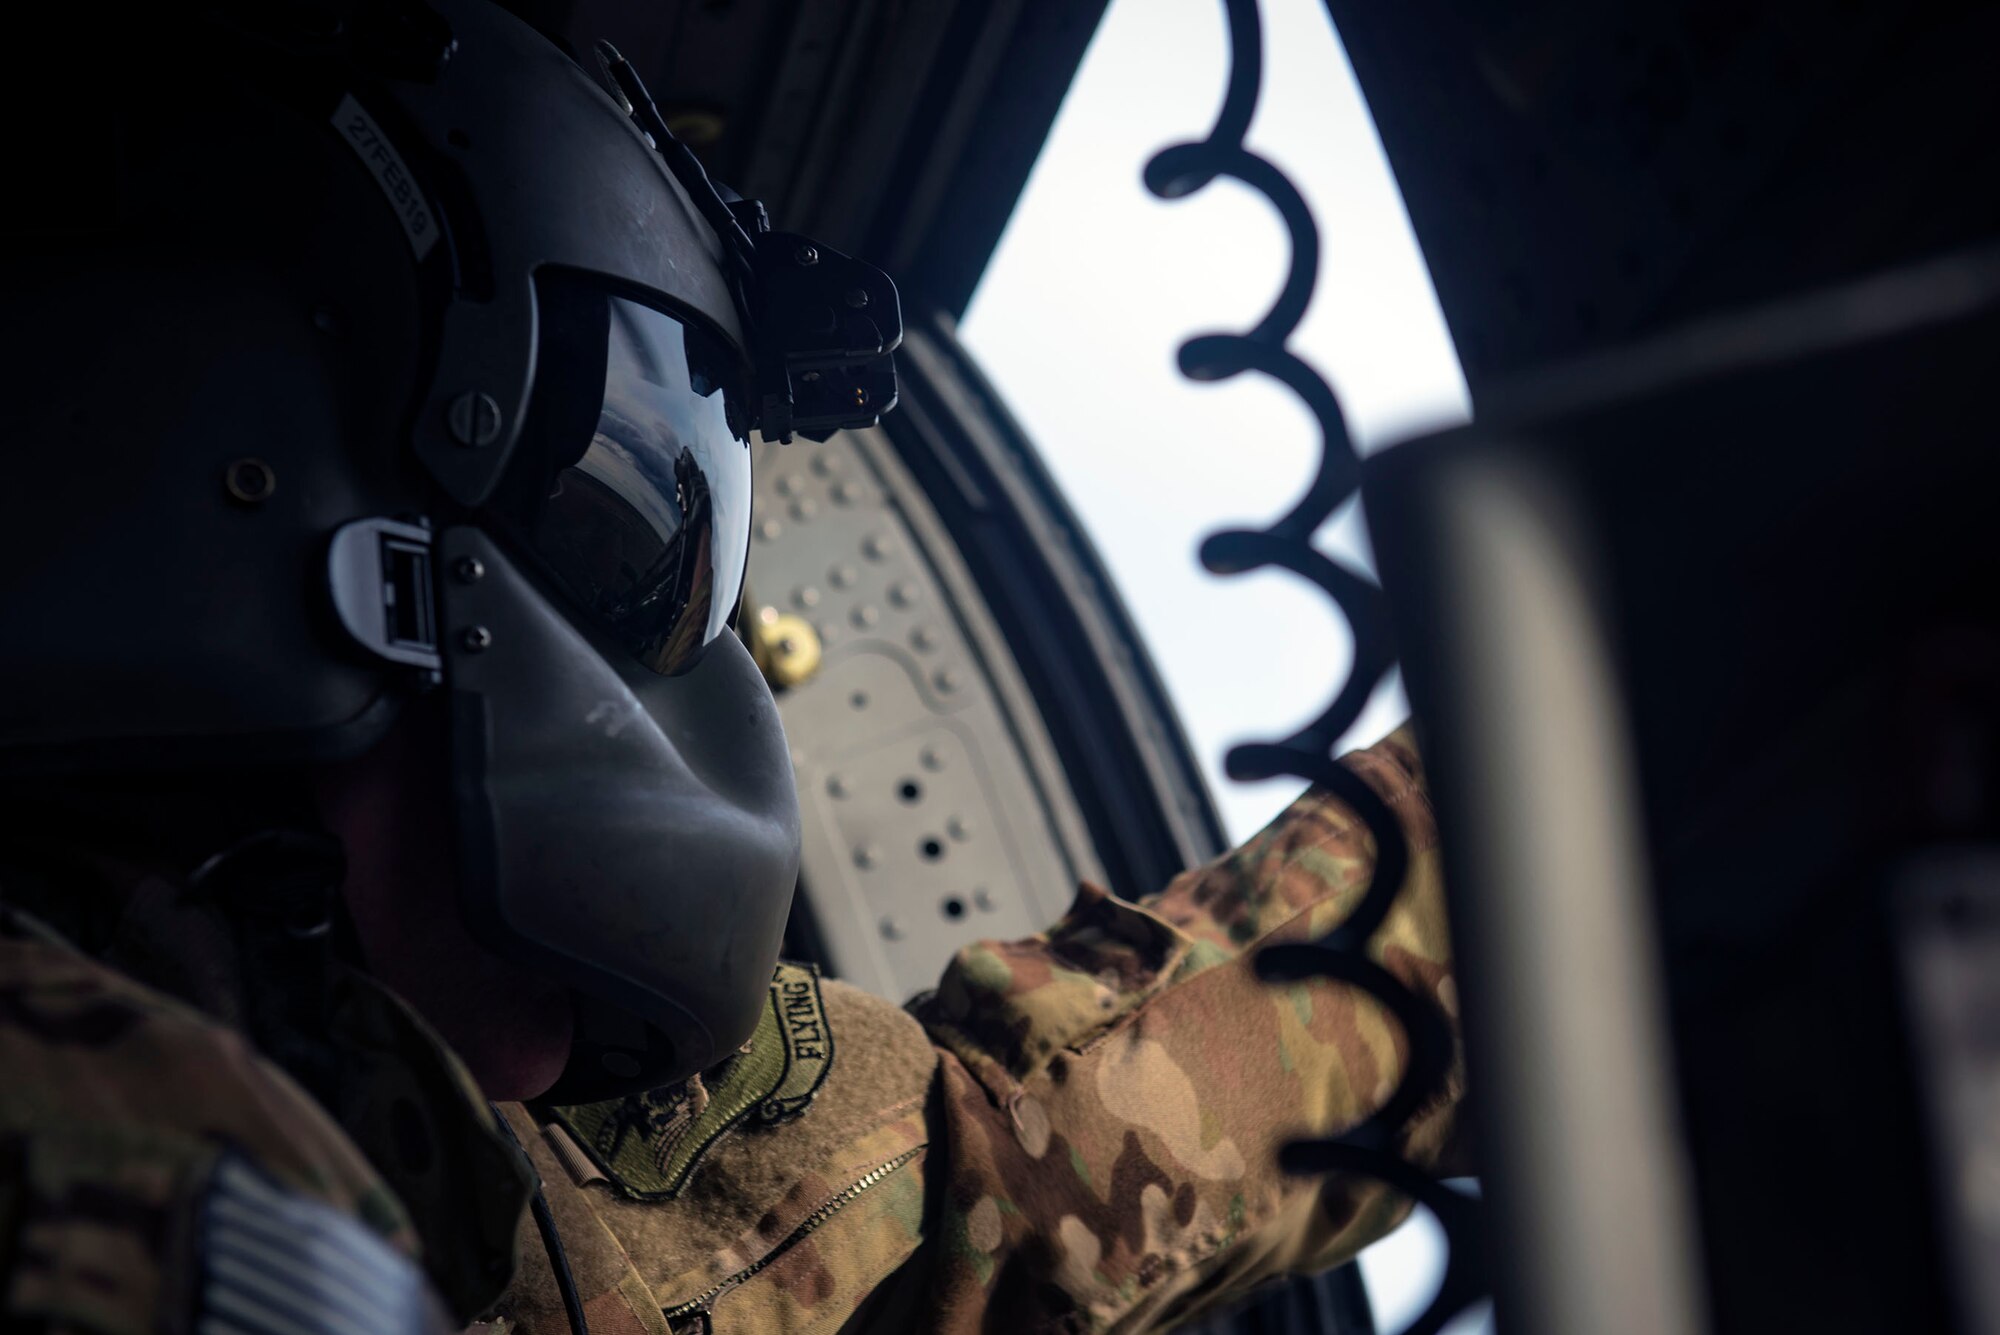 A 41st Rescue Squadron (RQS) special missions aviator scans a mock battlefield from an HH-60G Pave Hawk during pre-deployment ‘spin-up’ training, Dec. 12, 2018, at Avon Park Air Force Range, Fla. During this pre-deployment ‘spin-up’ training, Moody’s 347th Rescue Group tested and maximized their combat search and rescue (CSAR) and personnel recovery capabilities. Under normal circumstances, the HH-60G Pave Hawk helicopter crews and maintainers deploy from Moody and integrate with Guardian Angel teams from different bases. This time, Moody’s 38th RQS and 41st RQS’s will deploy together and utilized this exercise to improve their mission readiness and cohesion before their departure. (U.S. Air Force photo by Senior Airman Greg Nash)